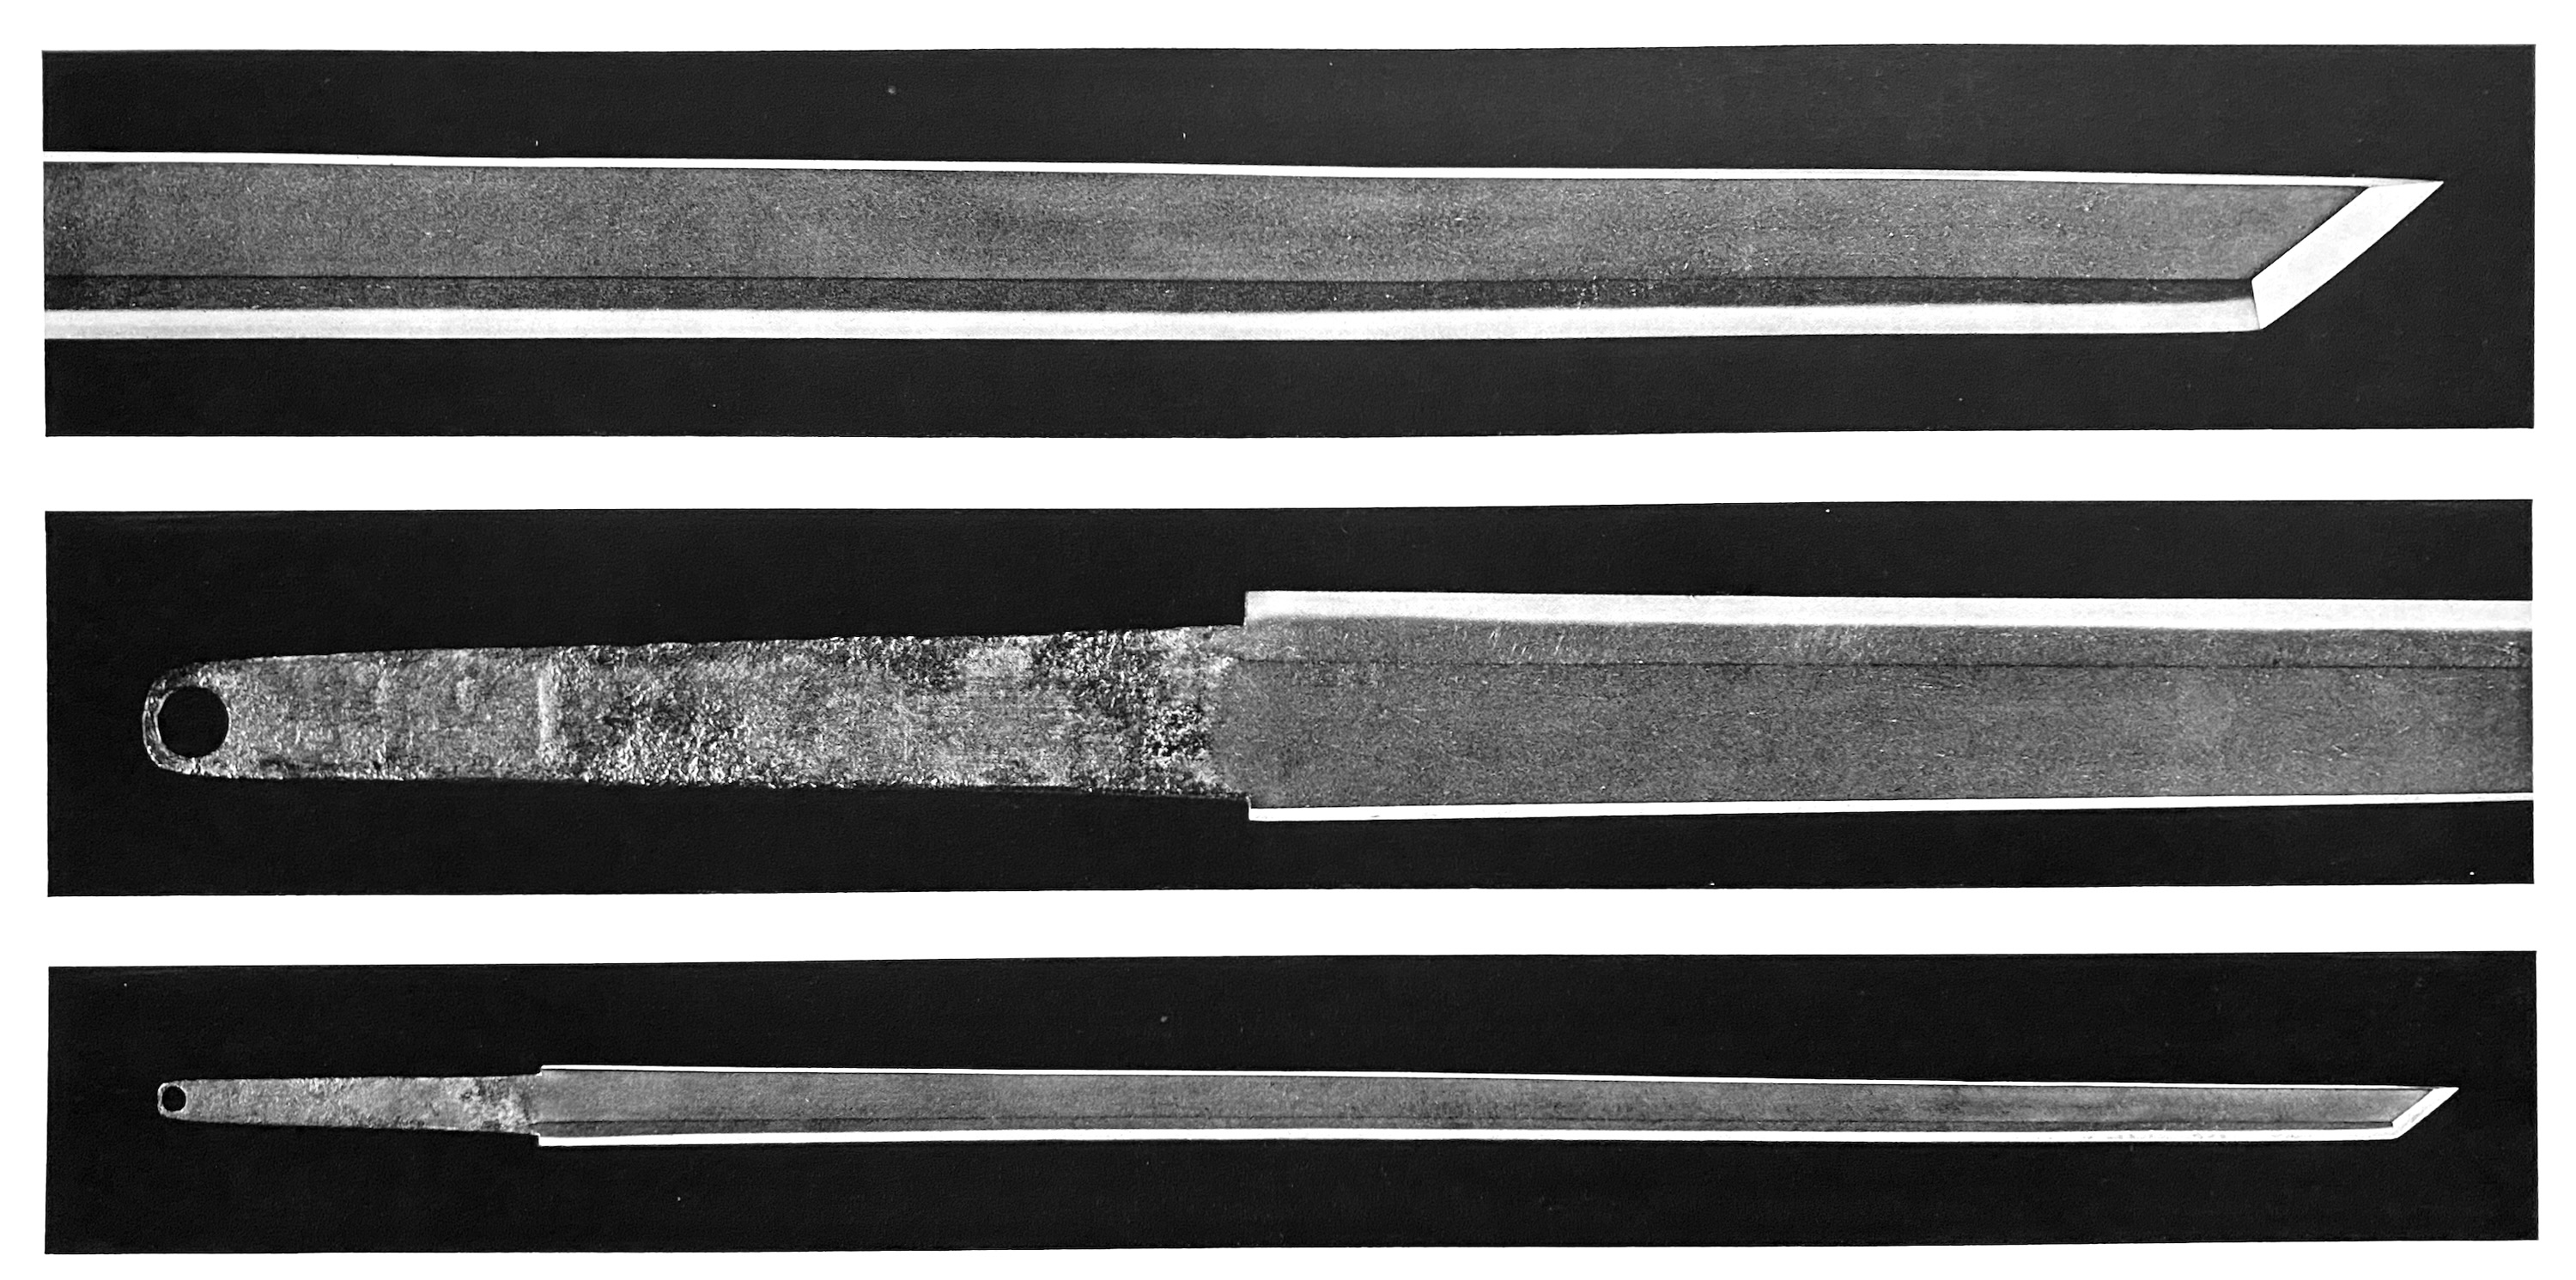 Tang dynasty sword in the Shosoin